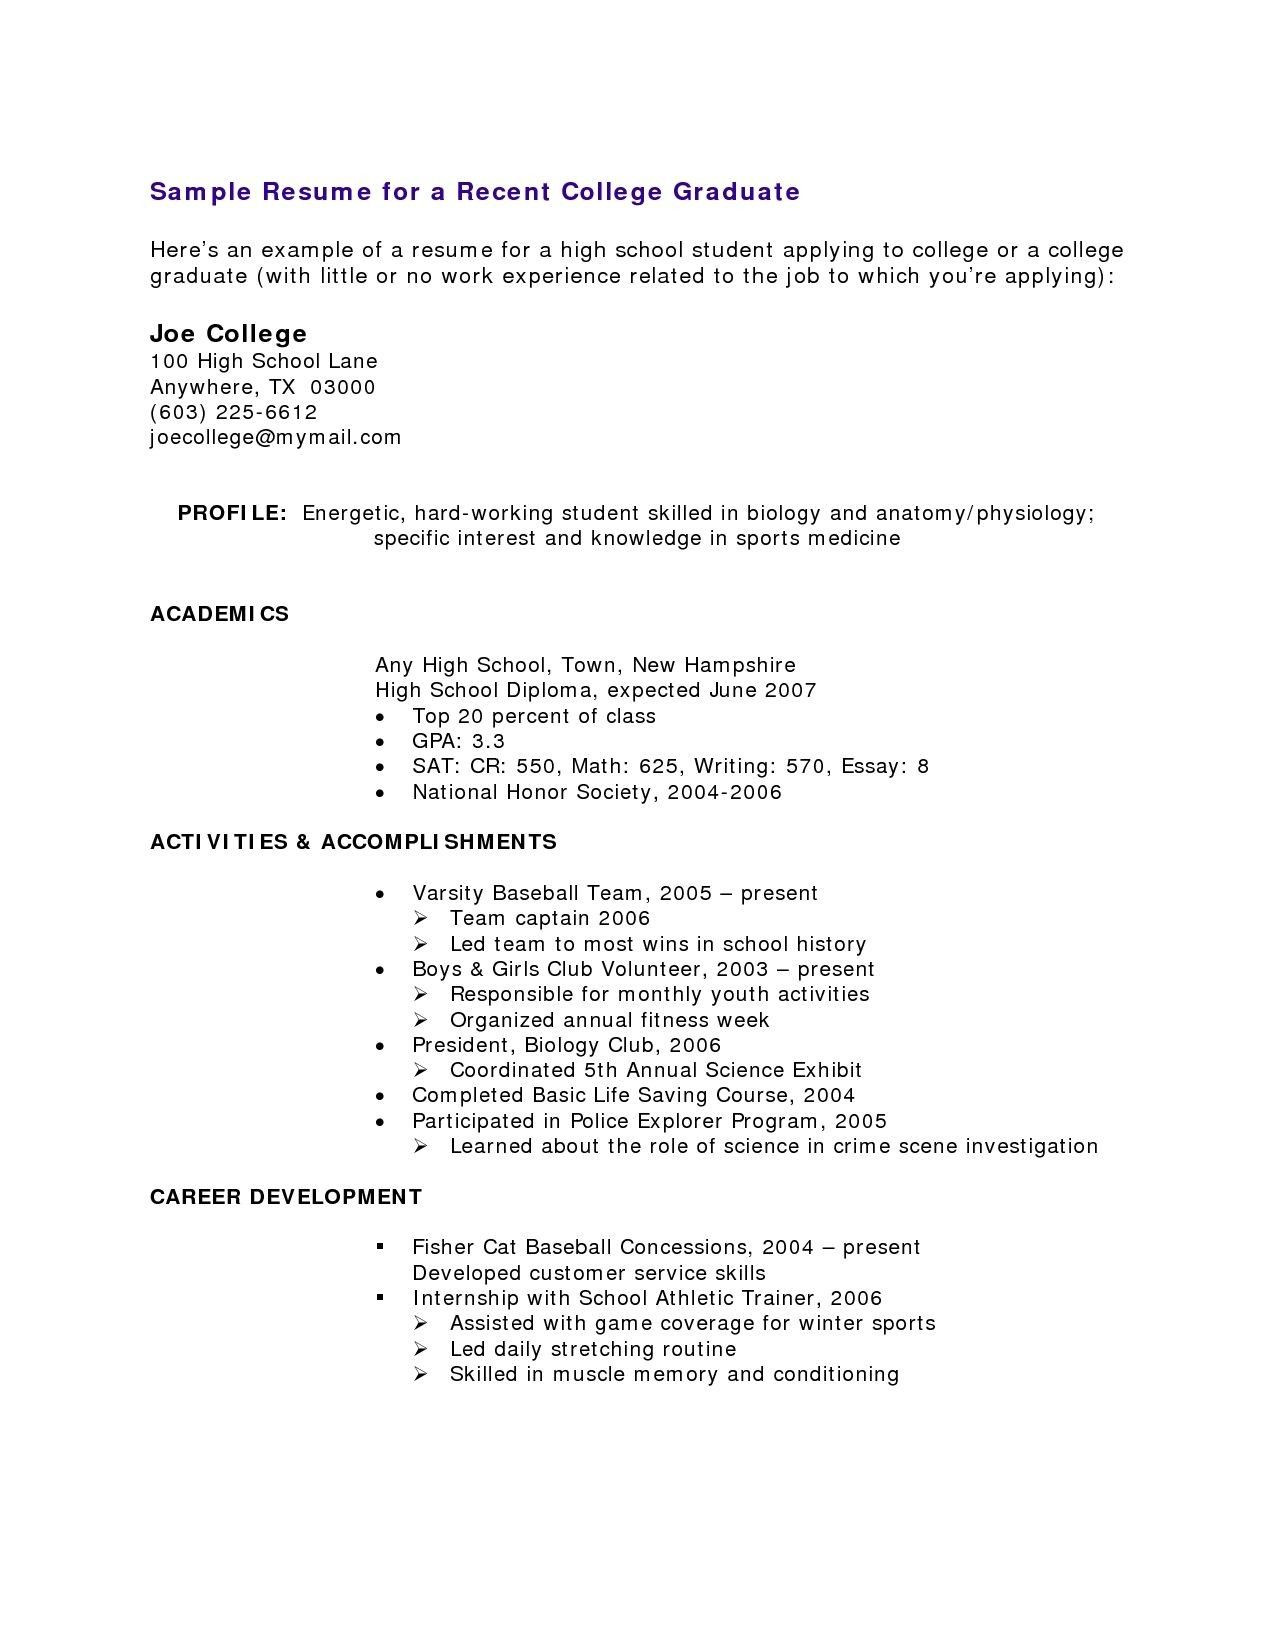 Sample Resume for Highschool Graduates with No Experience High School Student Resume with No Work Experience Resume High …